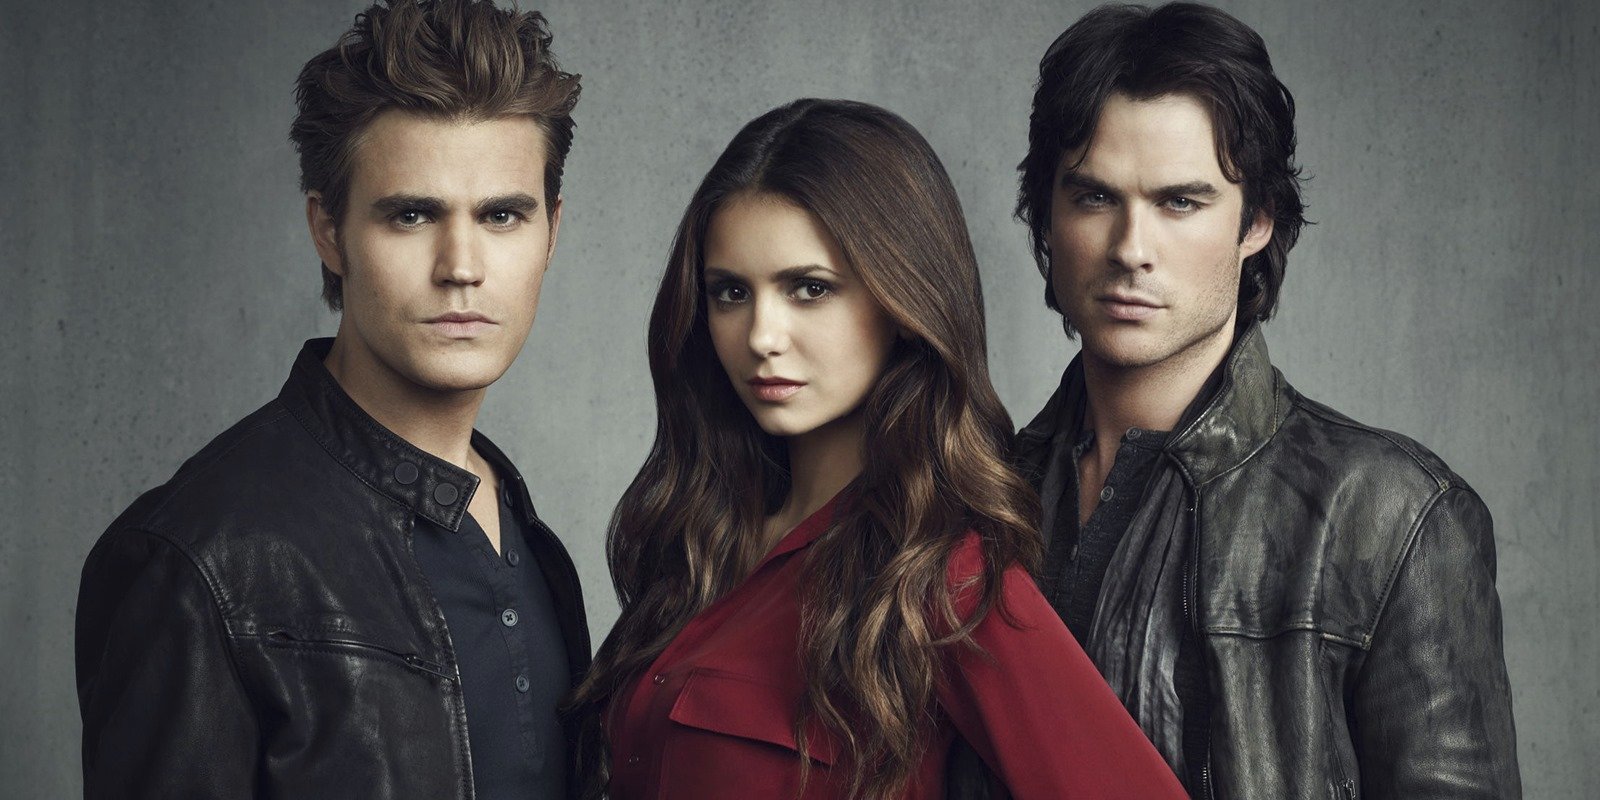 How Well Do You Know The Vampire Diaries?